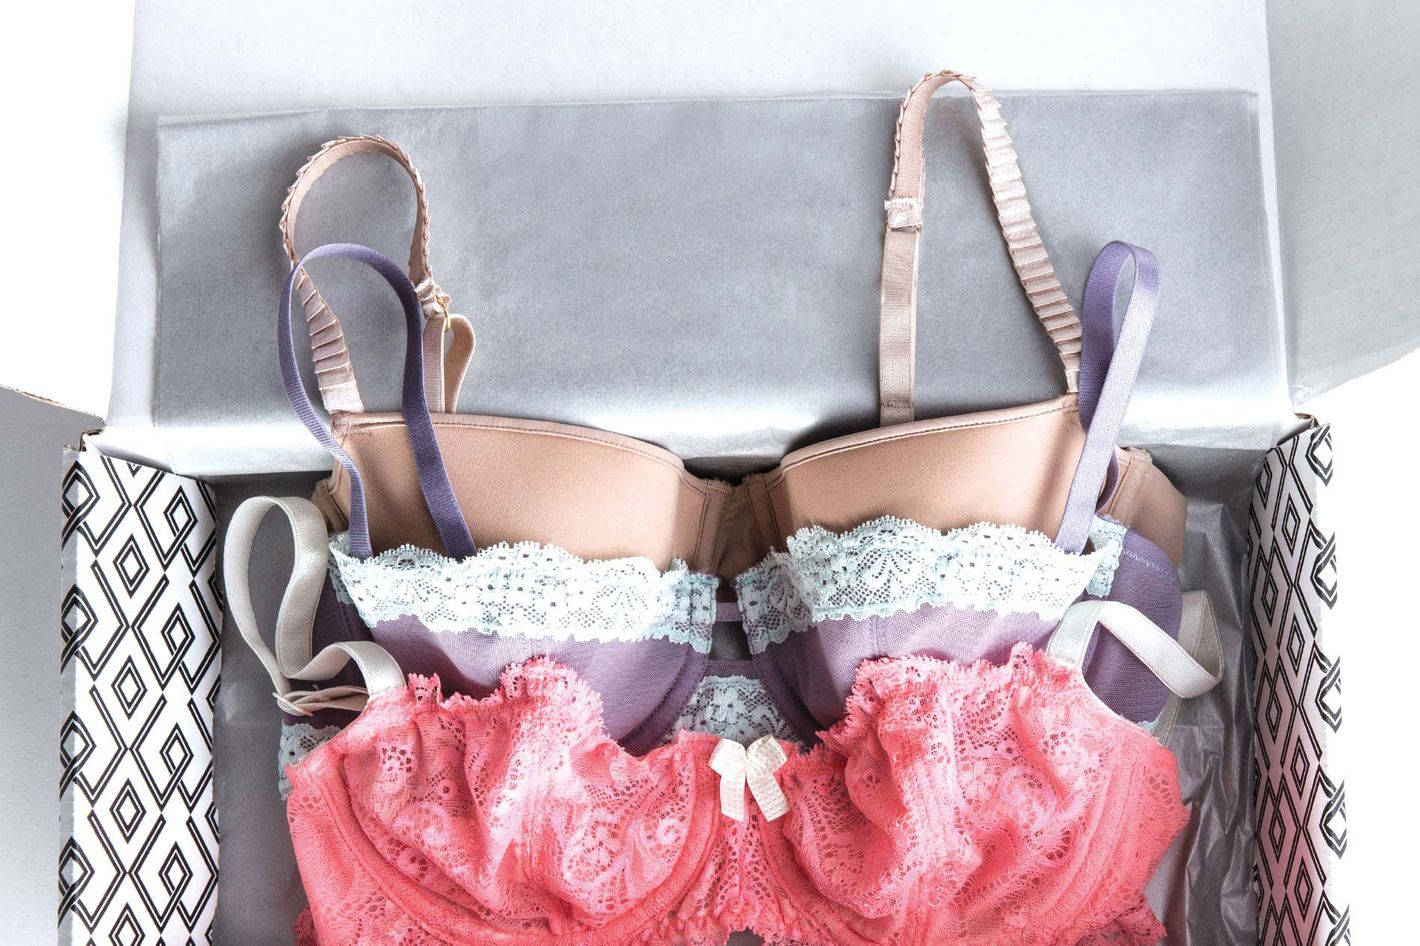 Q&A: The Women Trying to Revolutionize Bra Sizing